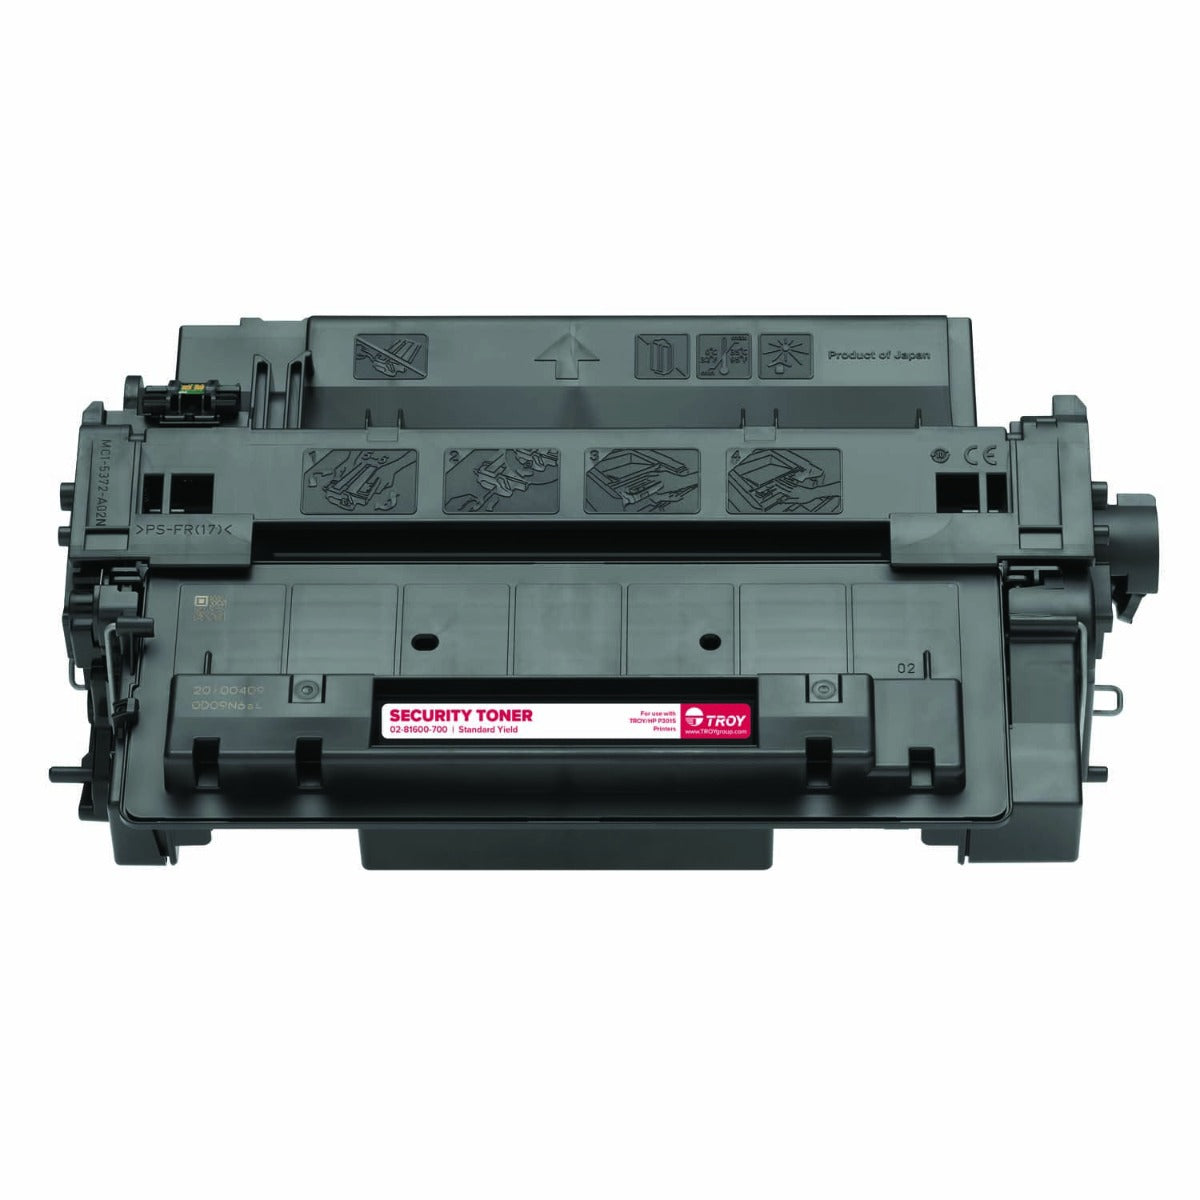 TROY 3015/M525 MFP Security Toner Standard Yield